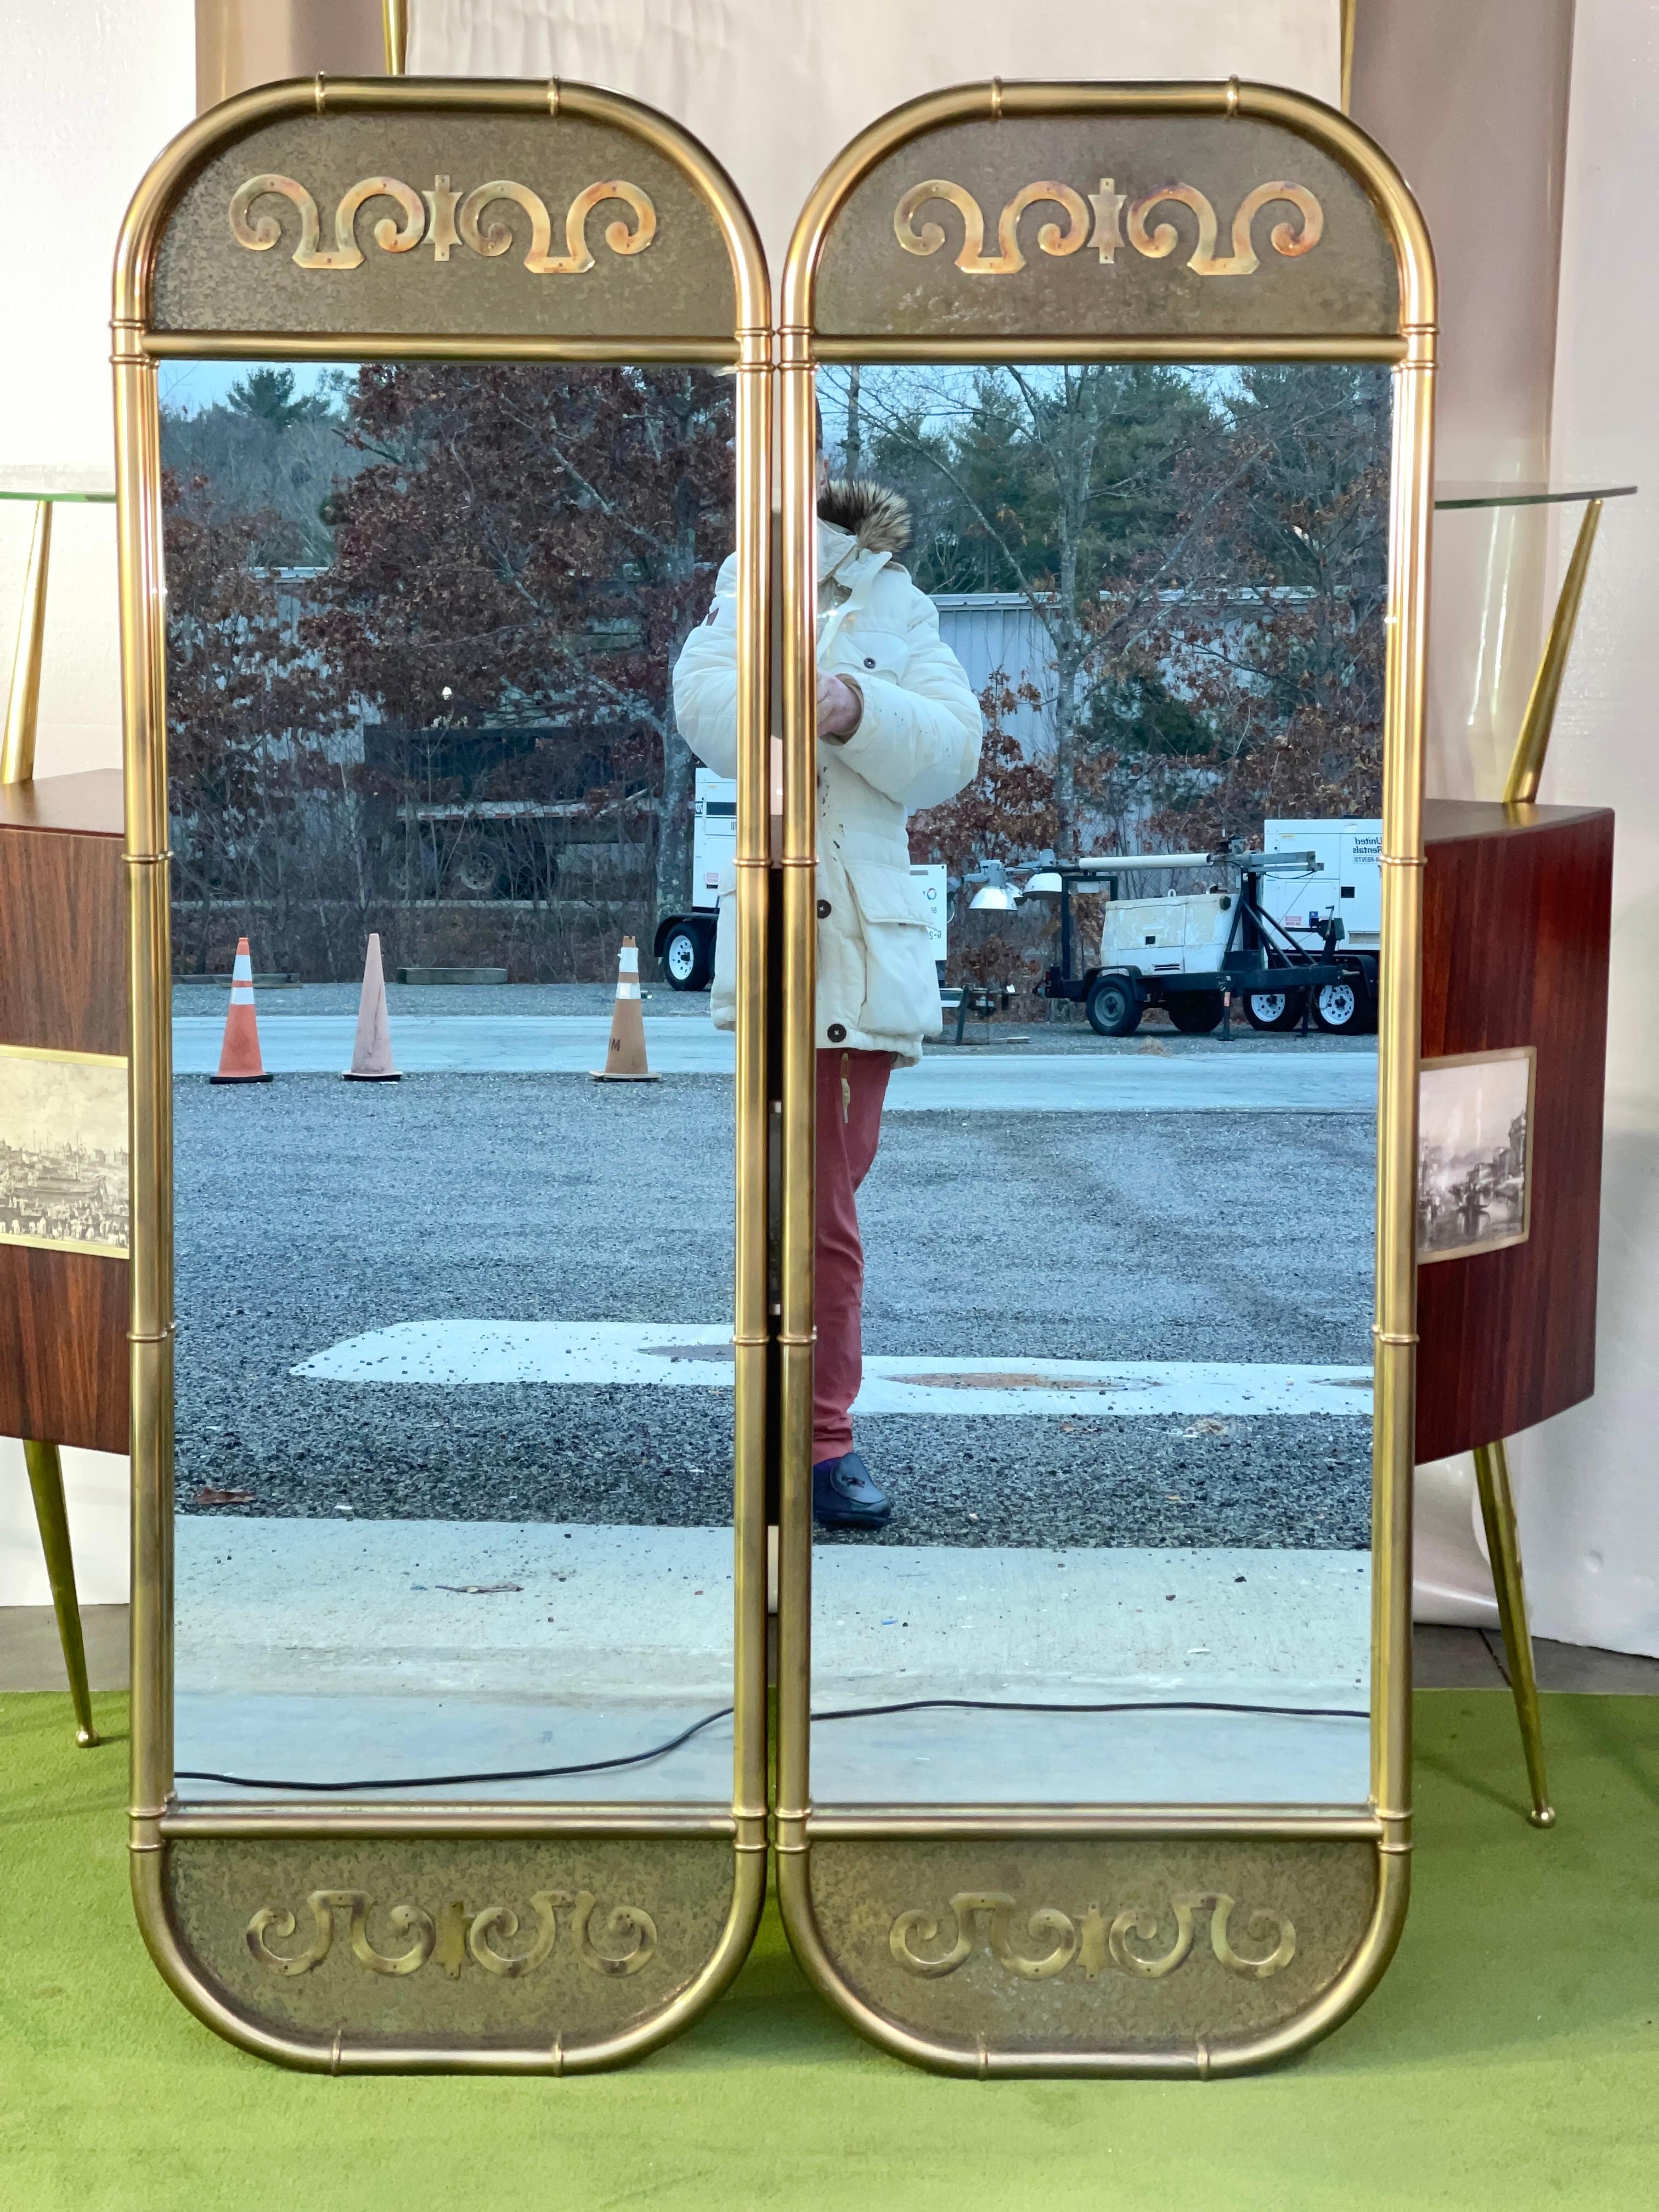 Pair of vertically oriented tall and narrow racetrack oval wall mirrors by Mastercraft in solid brass frame with faux bamboo elements and distinctive brass appliqué motif on textured and patinated brass panels. Sold as a pair.

See our separate